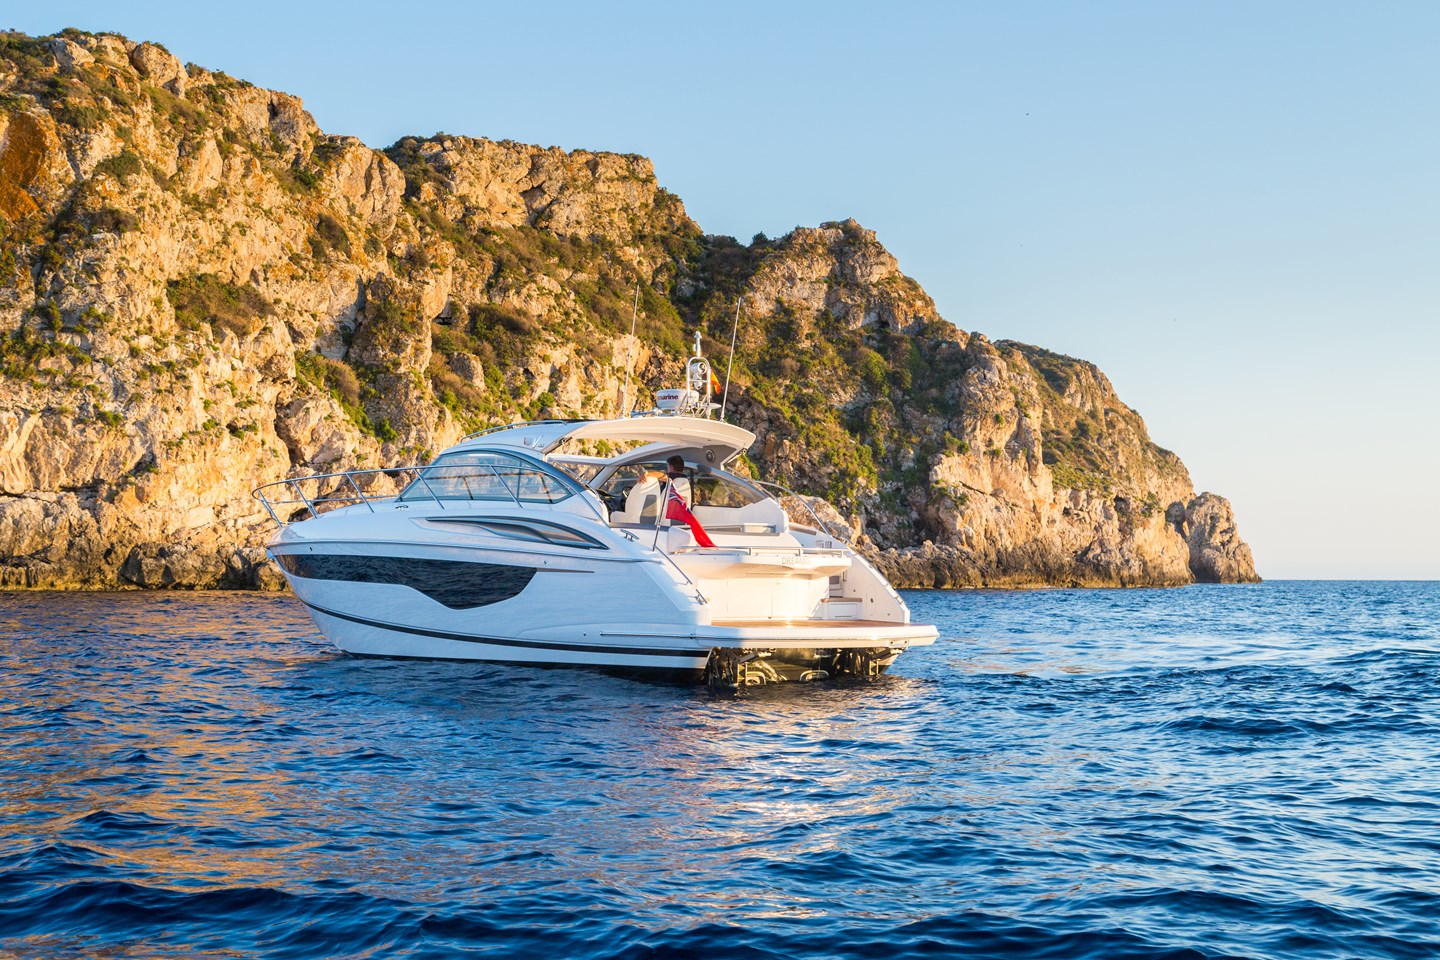 New Princess V40 for sale in Menorca for delivery 2024